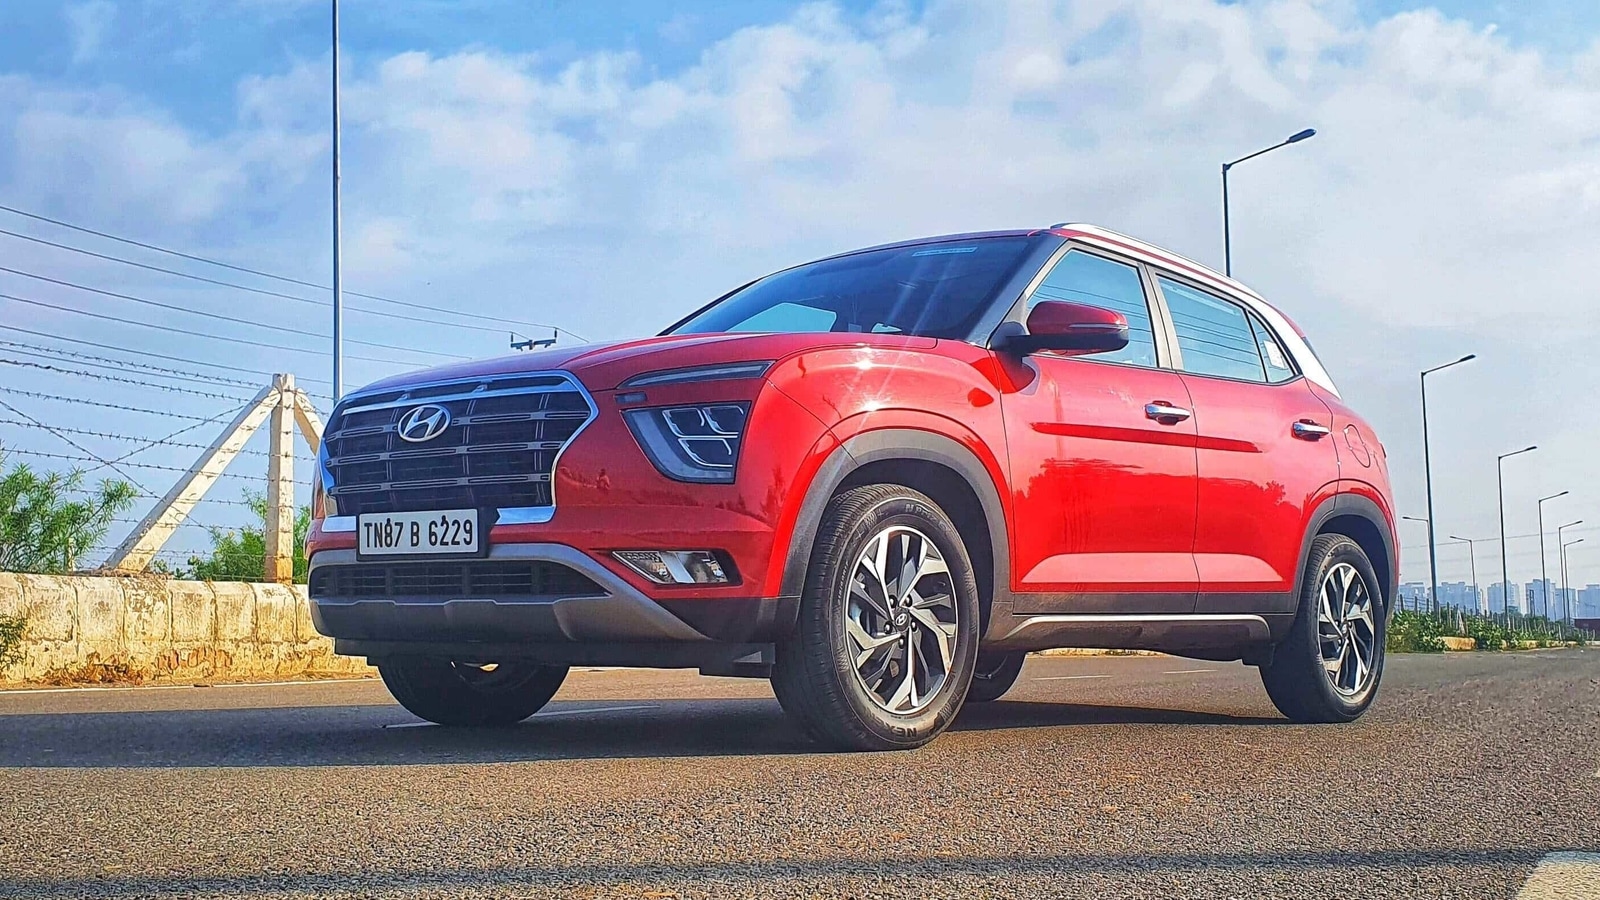 This Hyundai SUV shatters records: 10 lakh units sold and counting!